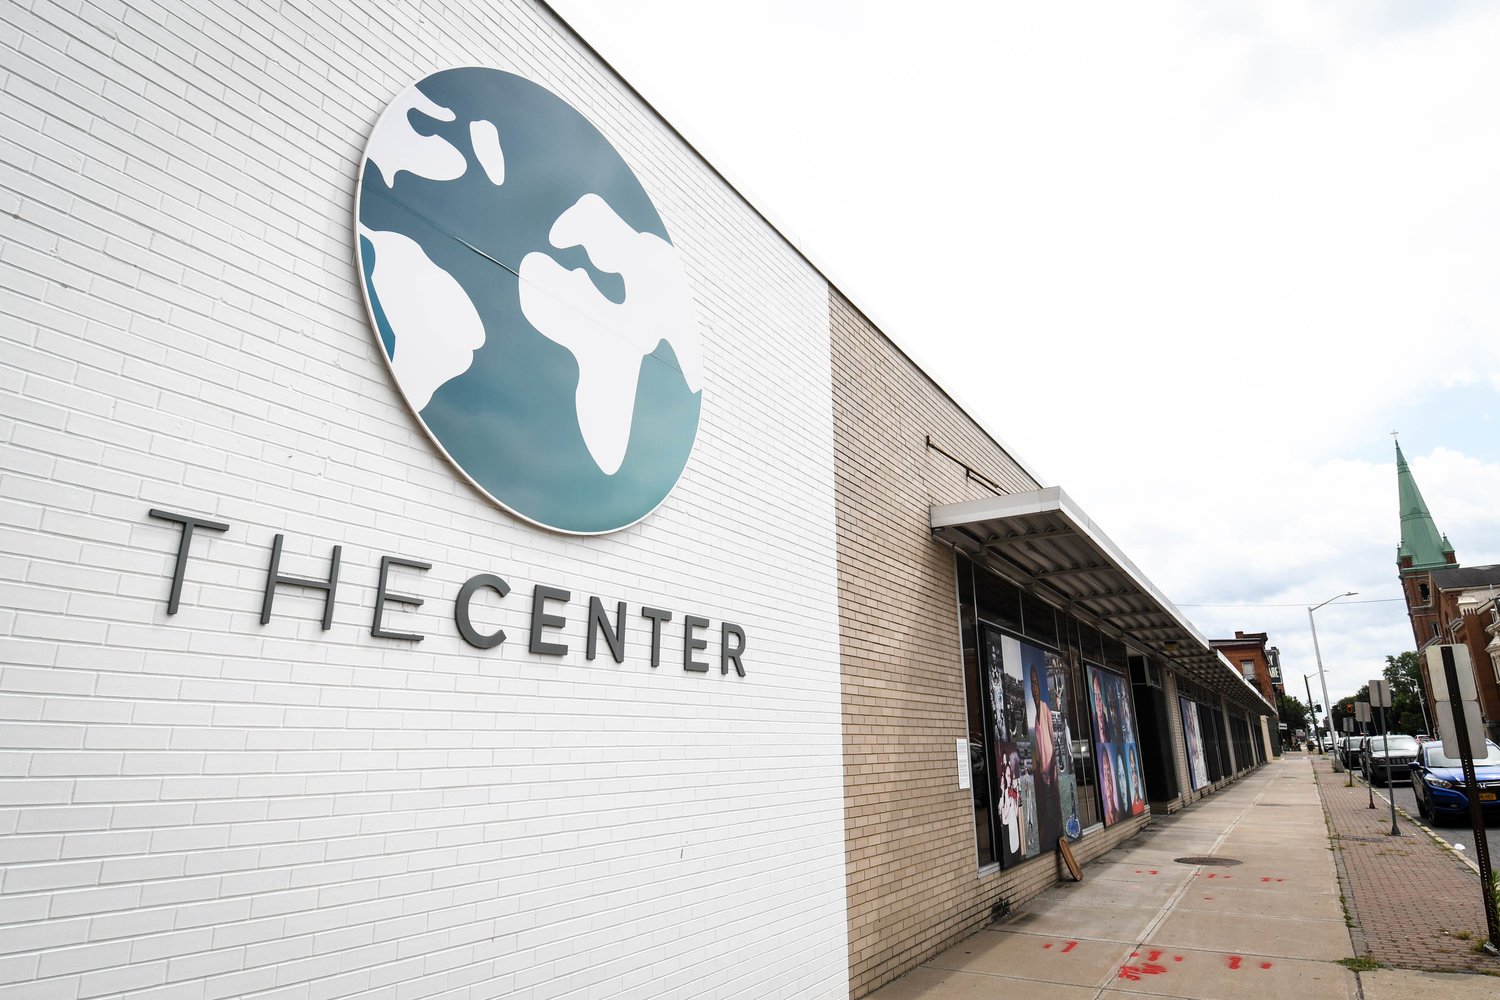 The Center, located at 201 Bleecker St. in Utica, will soon start the “Circle of Welcome” program that will help relocate refugees to Rome. Aiden Goldman, sophomore at Rome Free Academy, is working with The Center to start the Rome program.